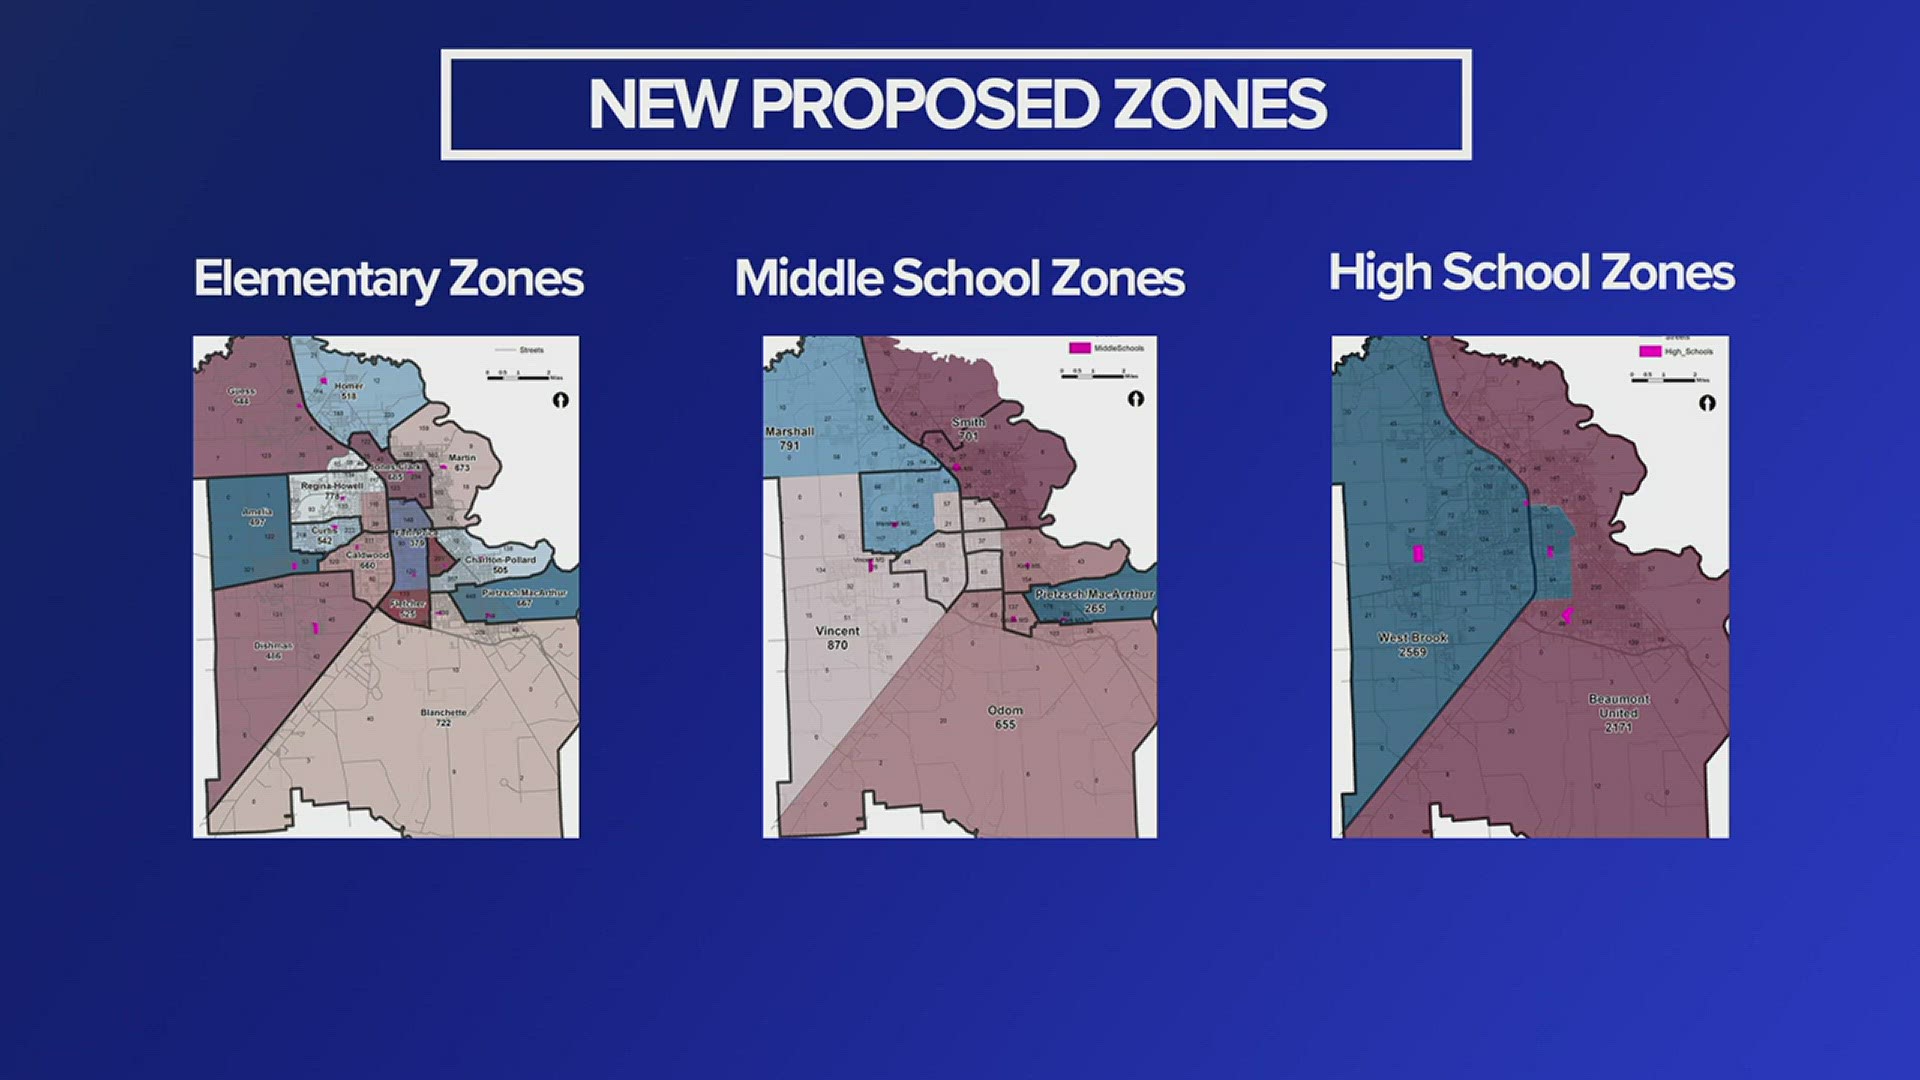 No schools will be closed as a result of the rezoning but attendance zones would shift.